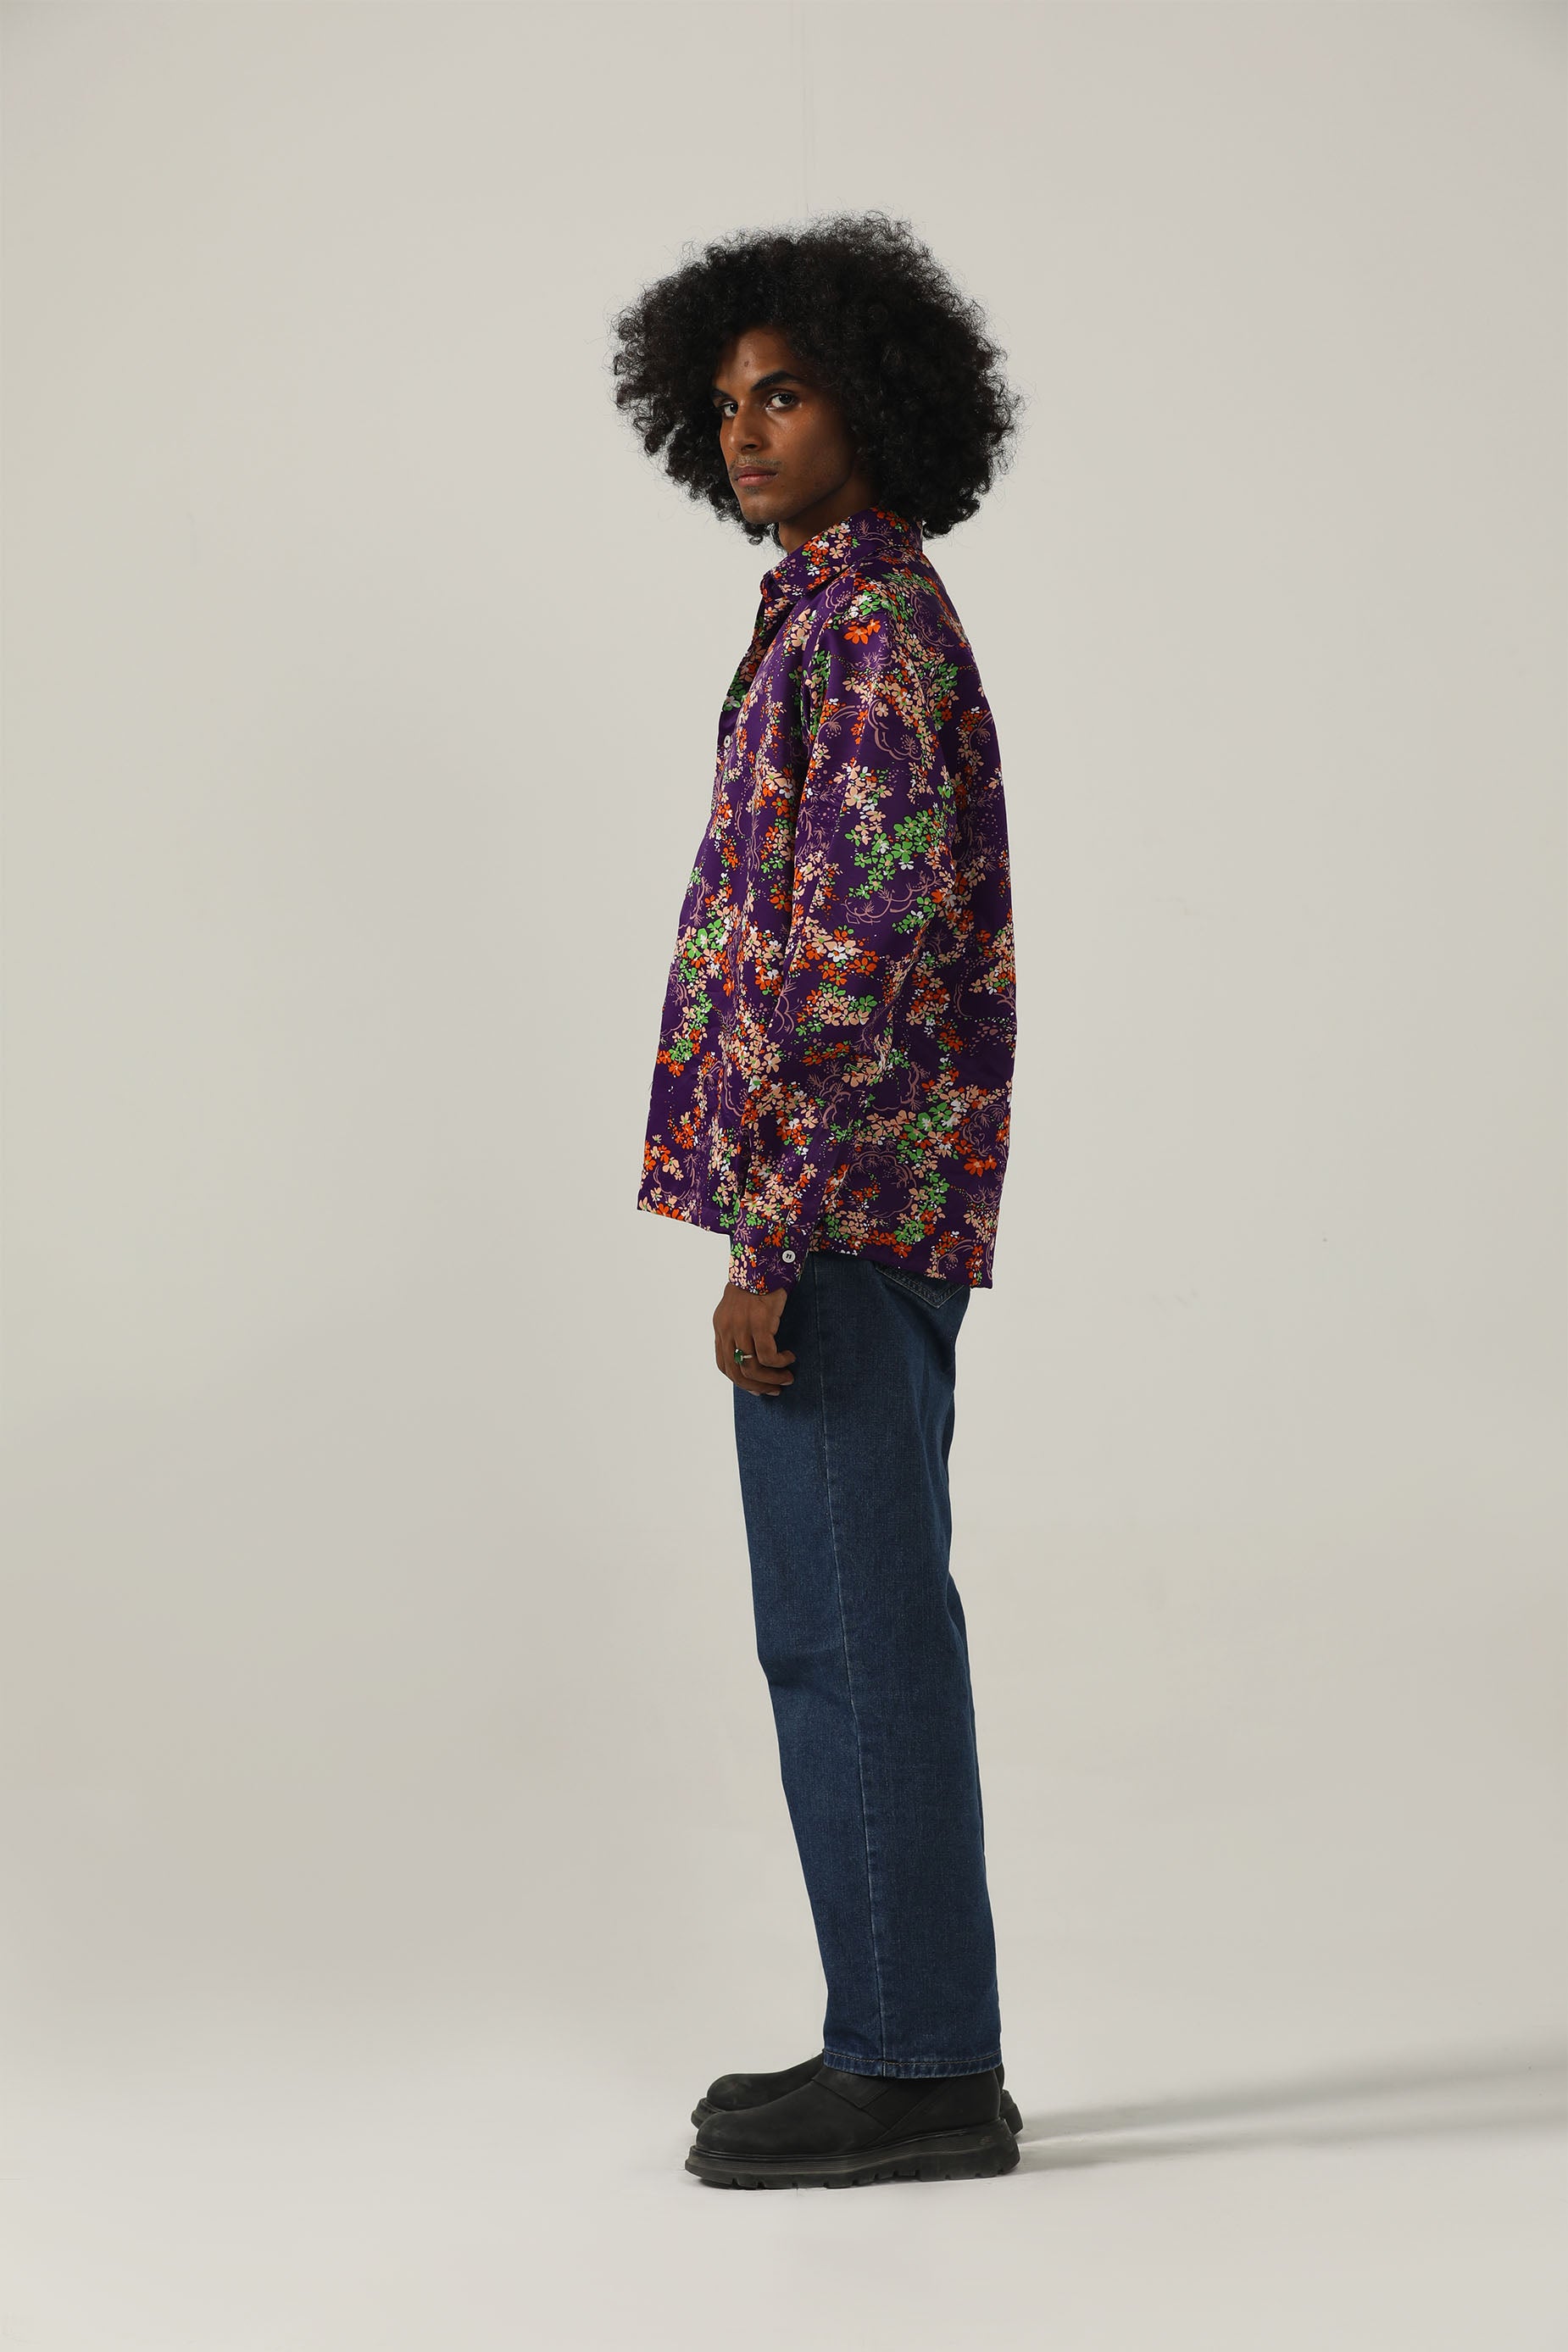 BUTTON UP FULL SLEEVE FlORAL SHIRT